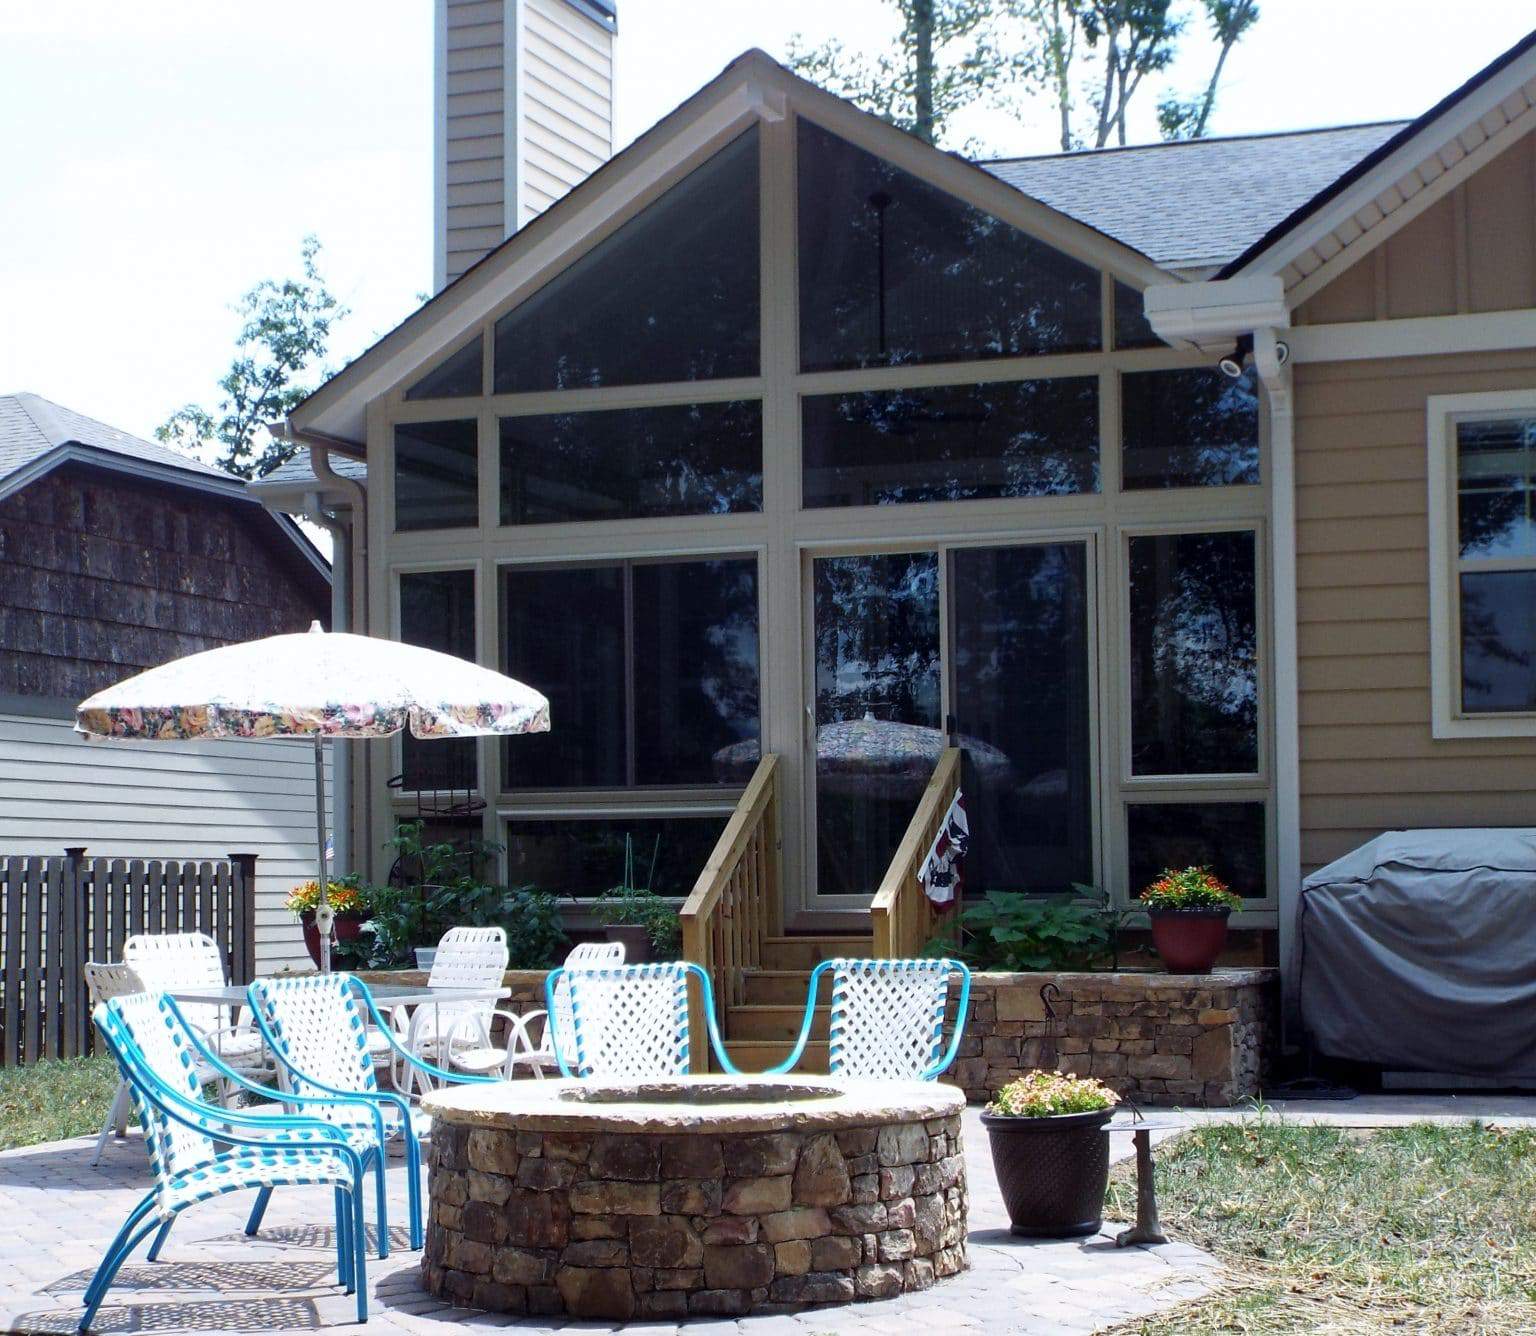 Sunrooms Patio Solutions - Sunrooms, Awnings, & Interior/Exterior Shades